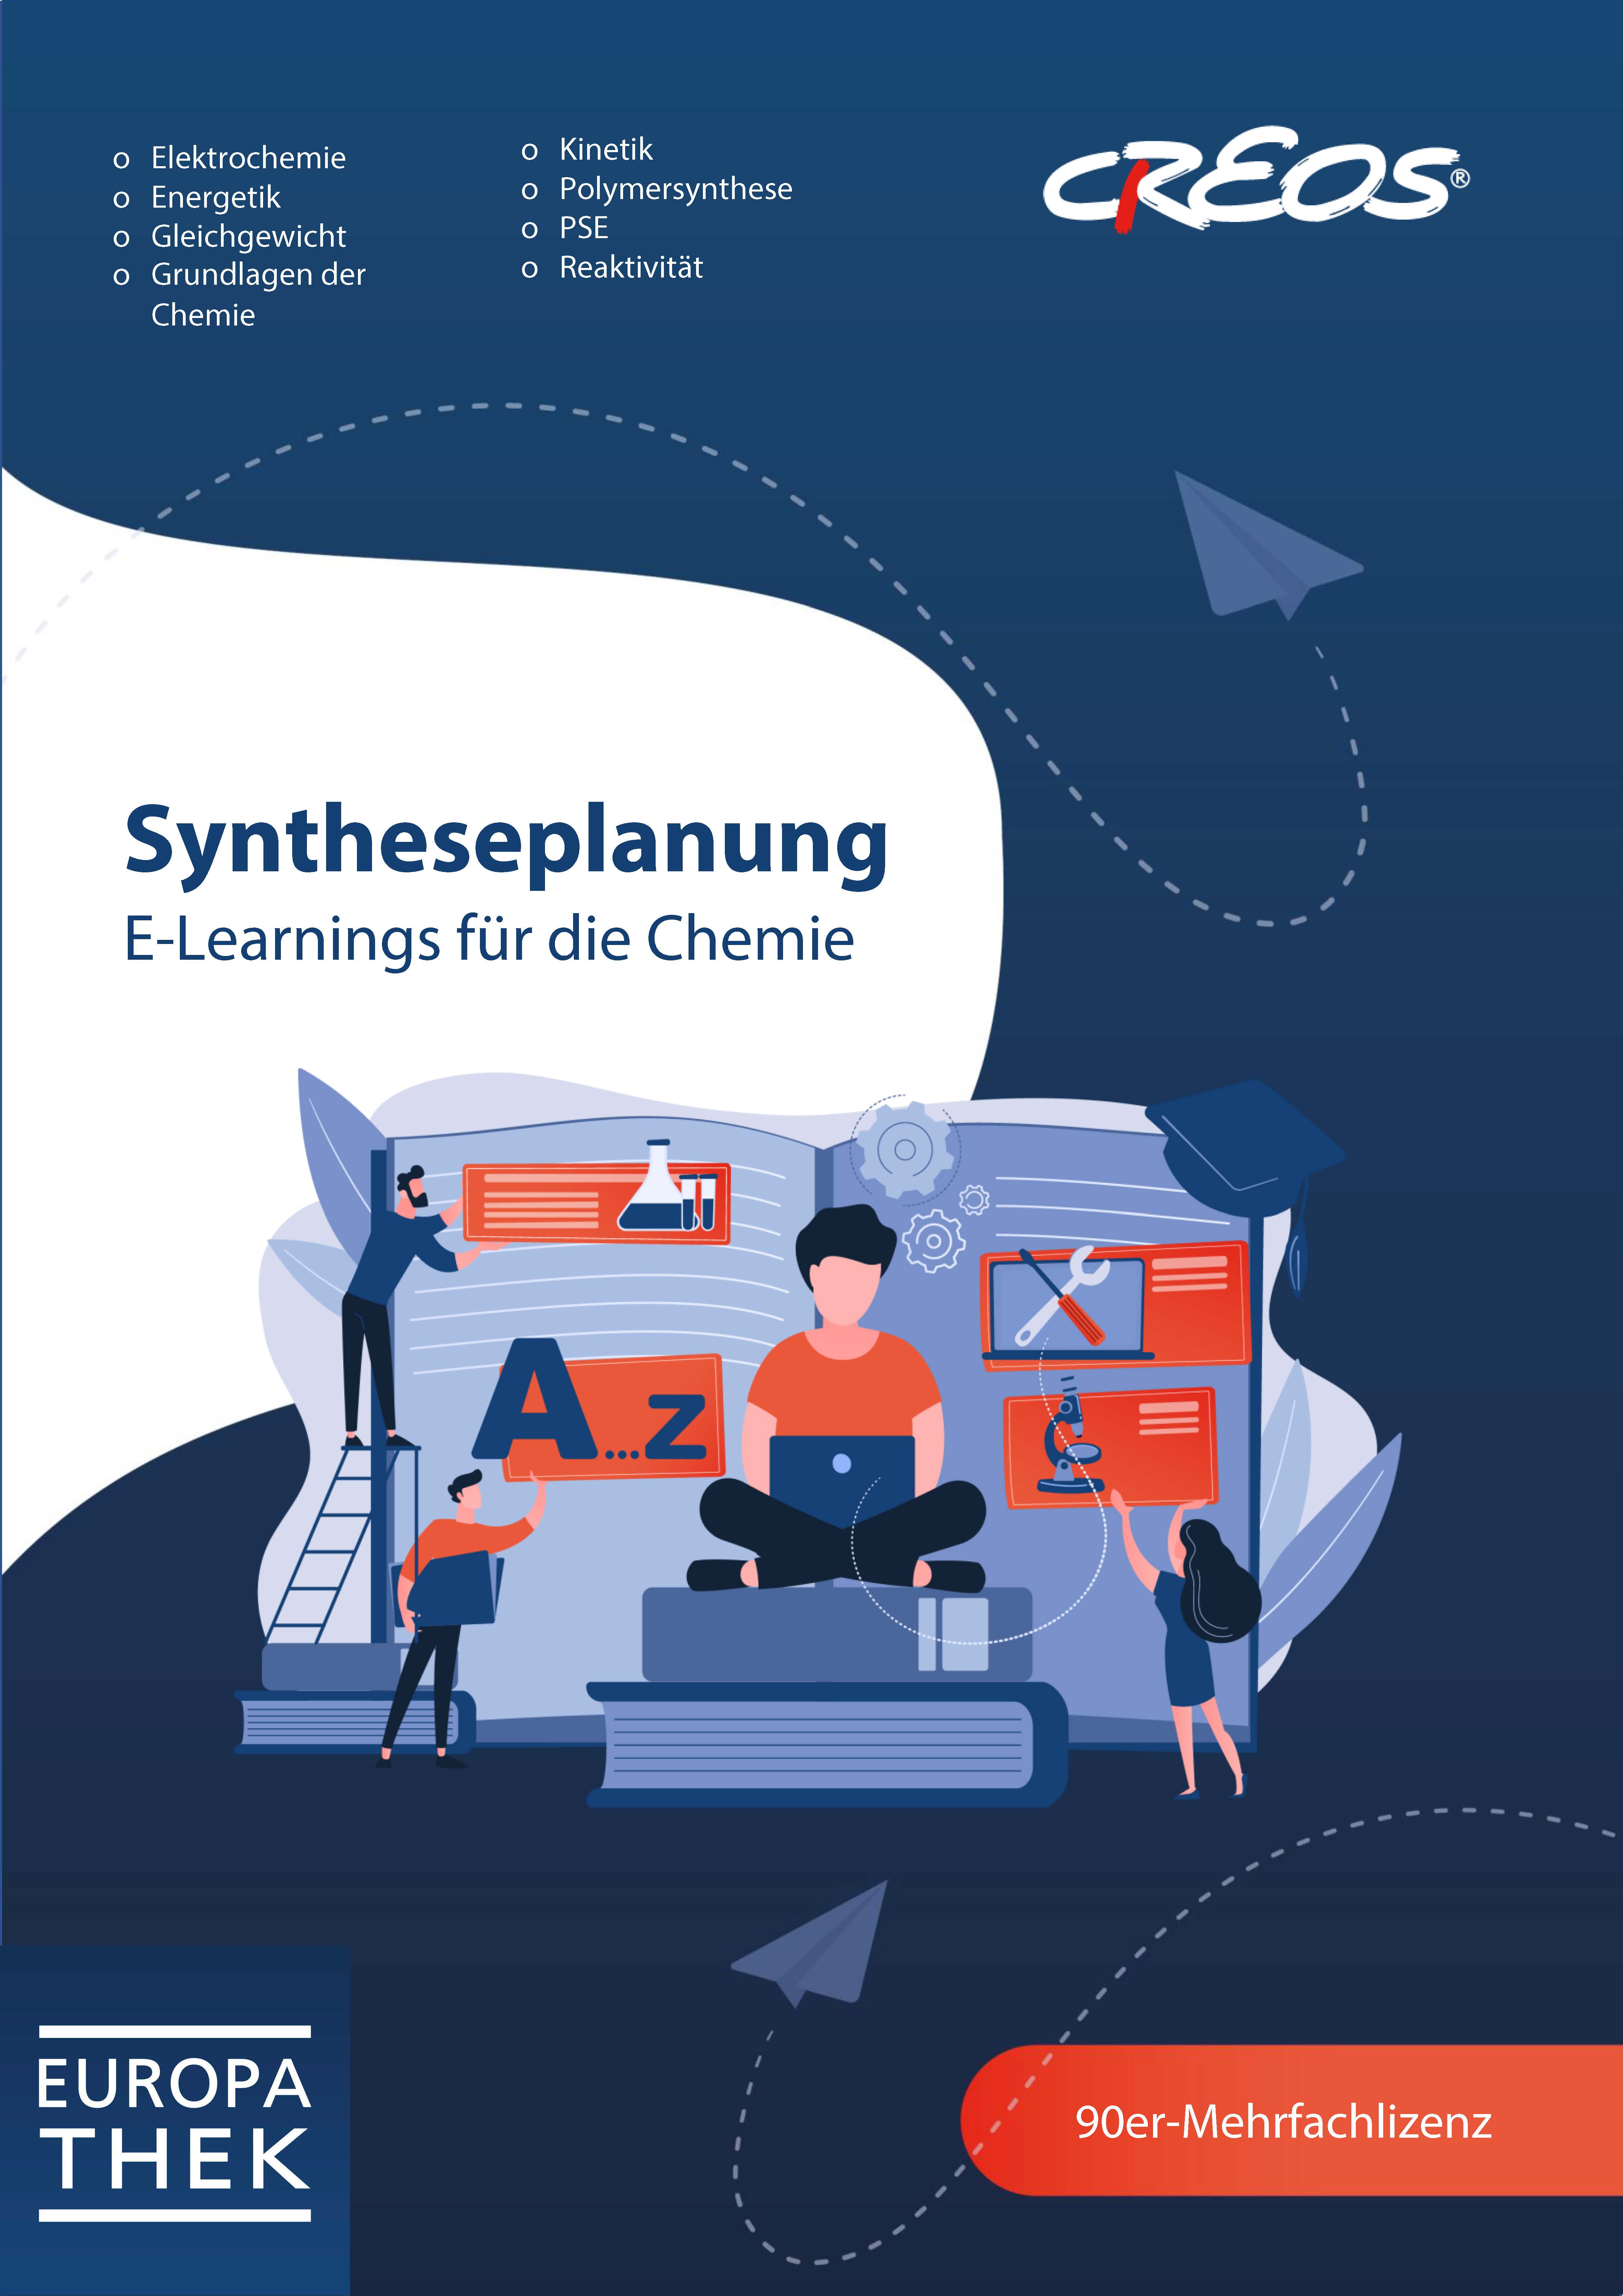 Syntheseplanung - E-Learnings für die Chemie